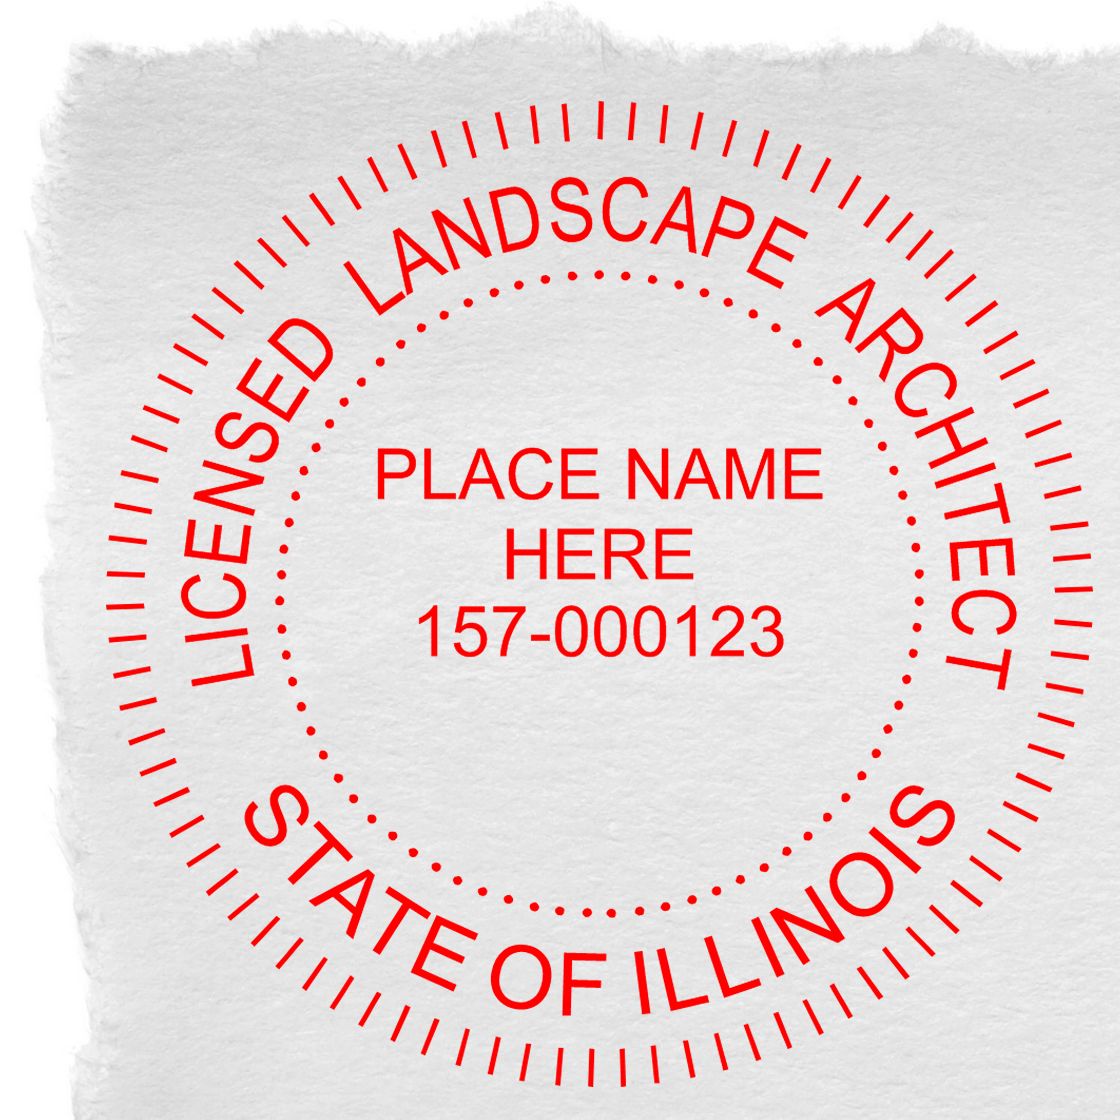 A photograph of the Digital Illinois Landscape Architect Stamp stamp impression reveals a vivid, professional image of the on paper.